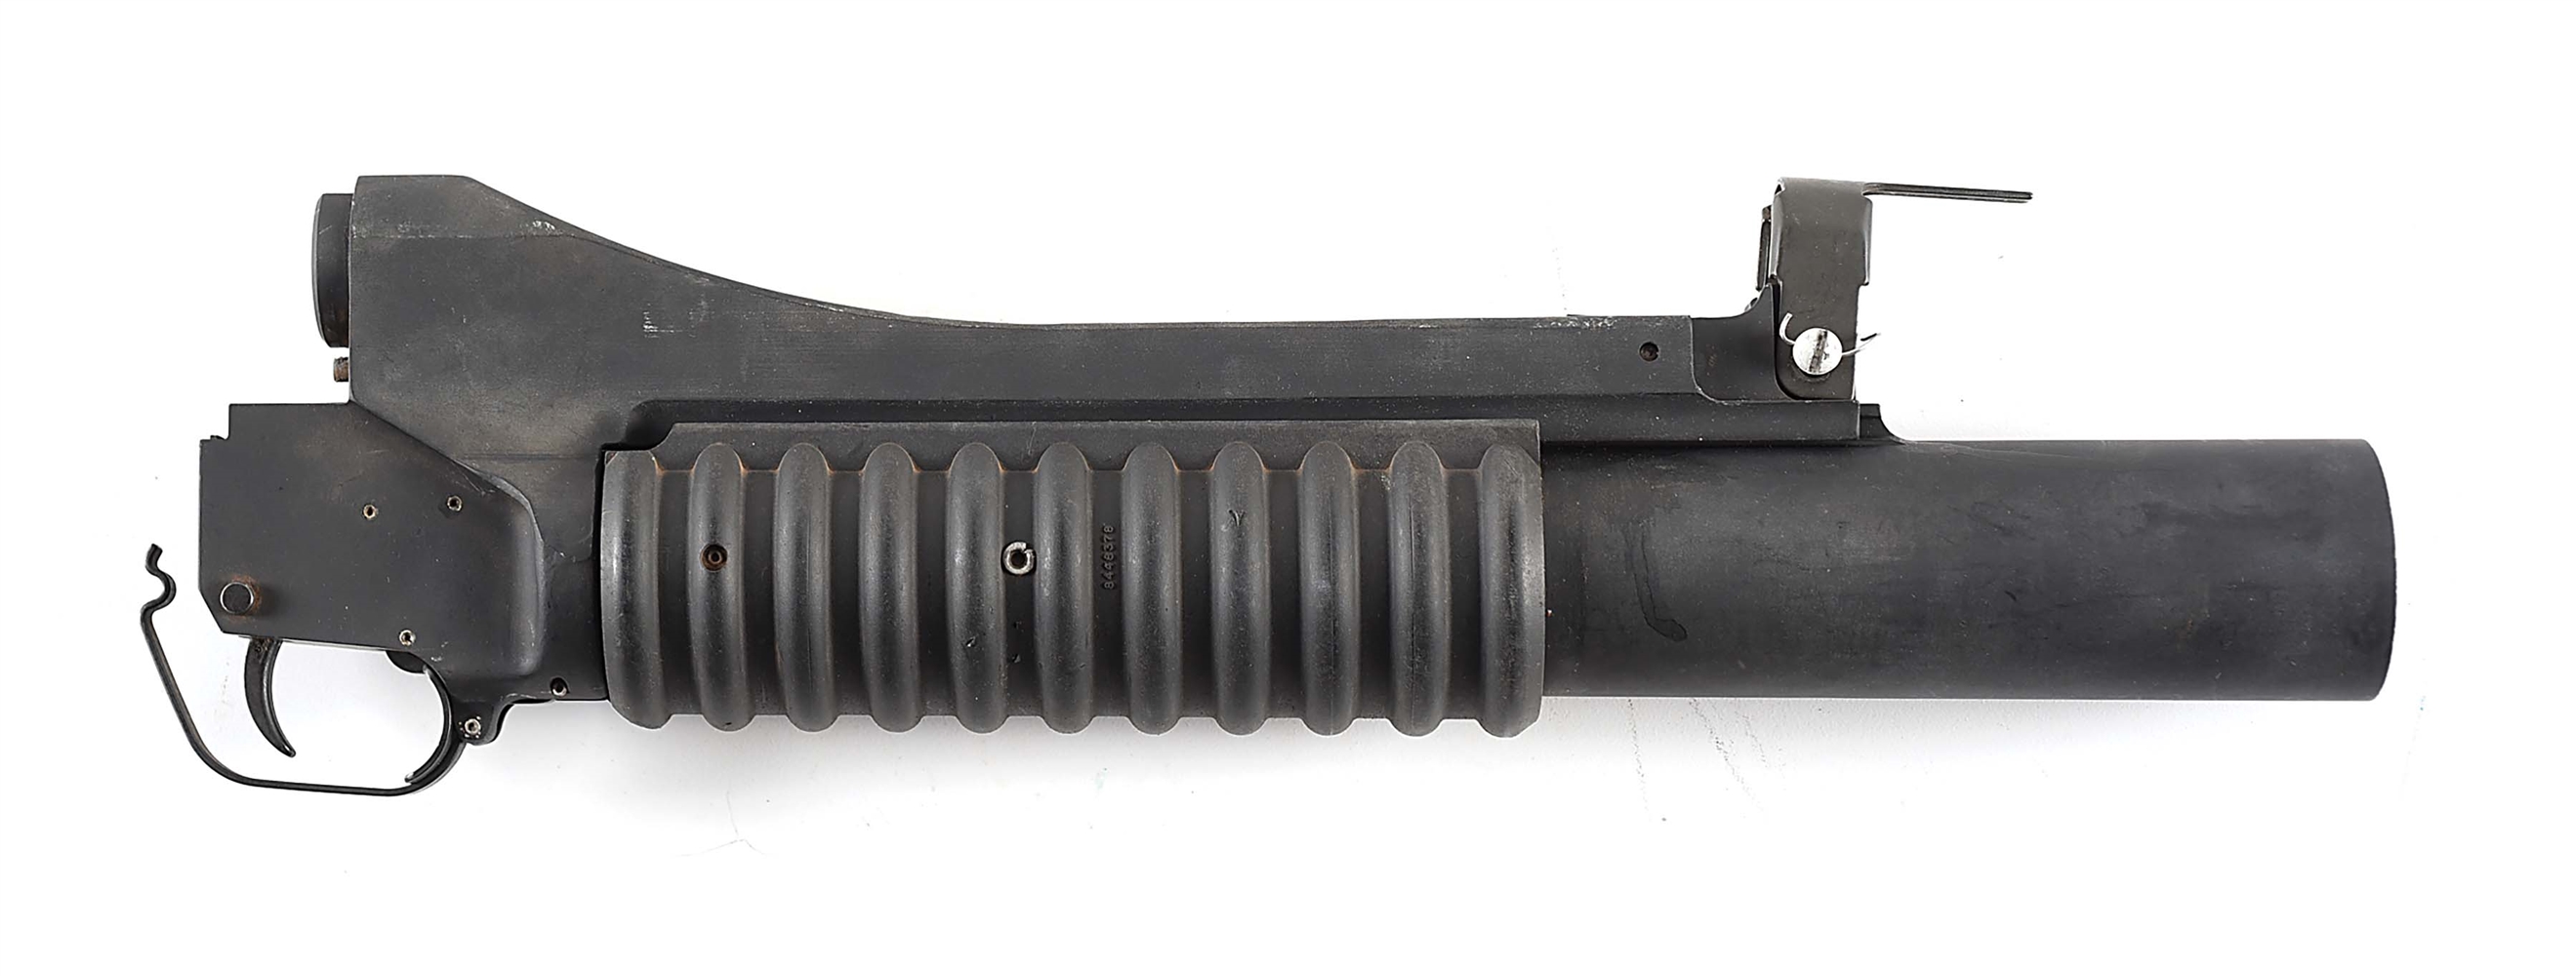 (D) NEAR MINT UNFIRED 40 MM COLT M203 GRENADE LAUNCHER WITH SIGHT AND MANUAL (DESTRUCTIVE DEVICE).